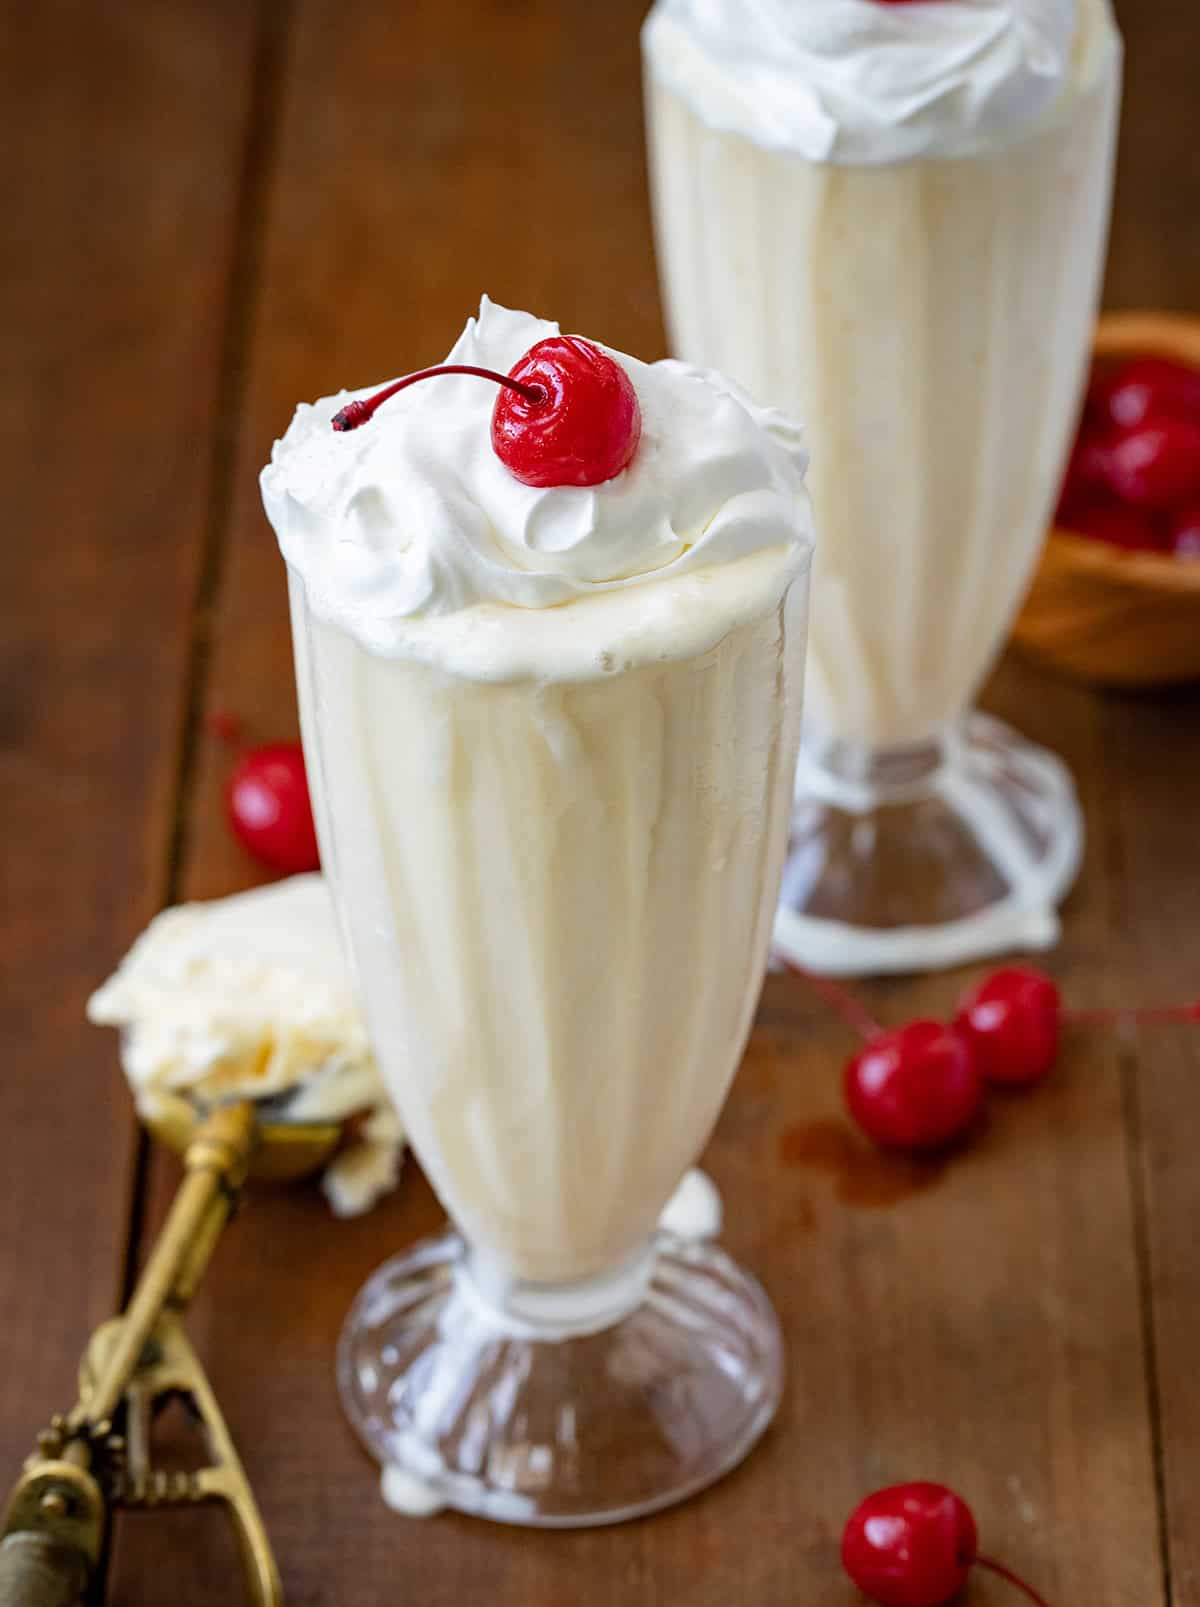 Two Vanilla Milkshakes on a wooden table with whipped cream and cherries.